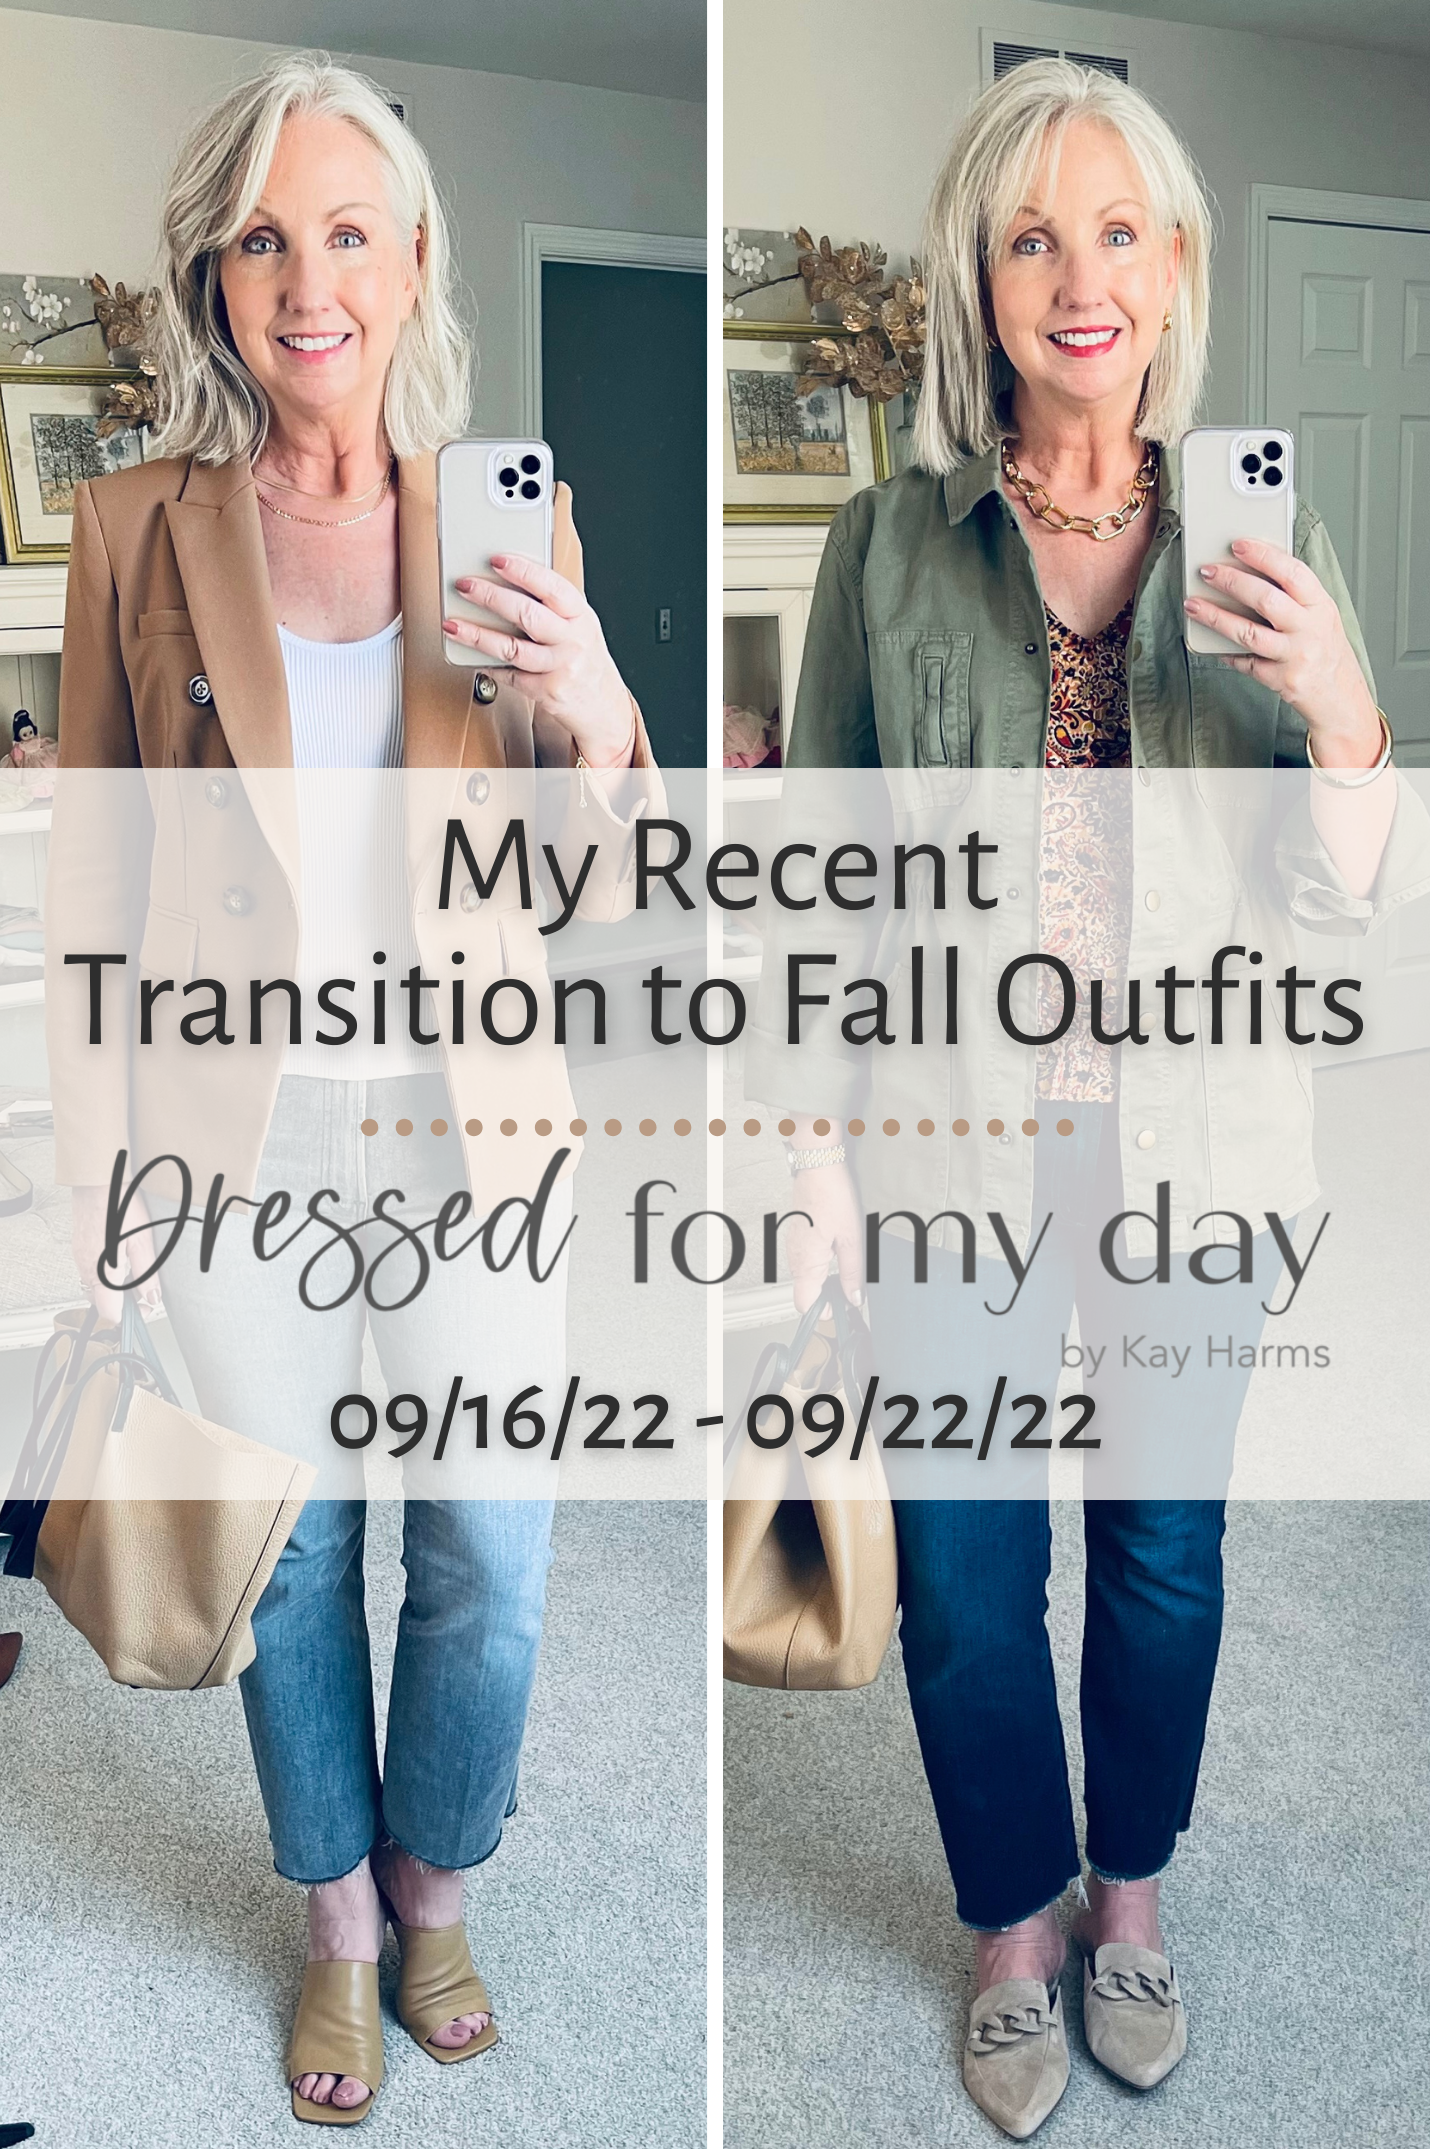 My Recent Transition to Fall Outfits